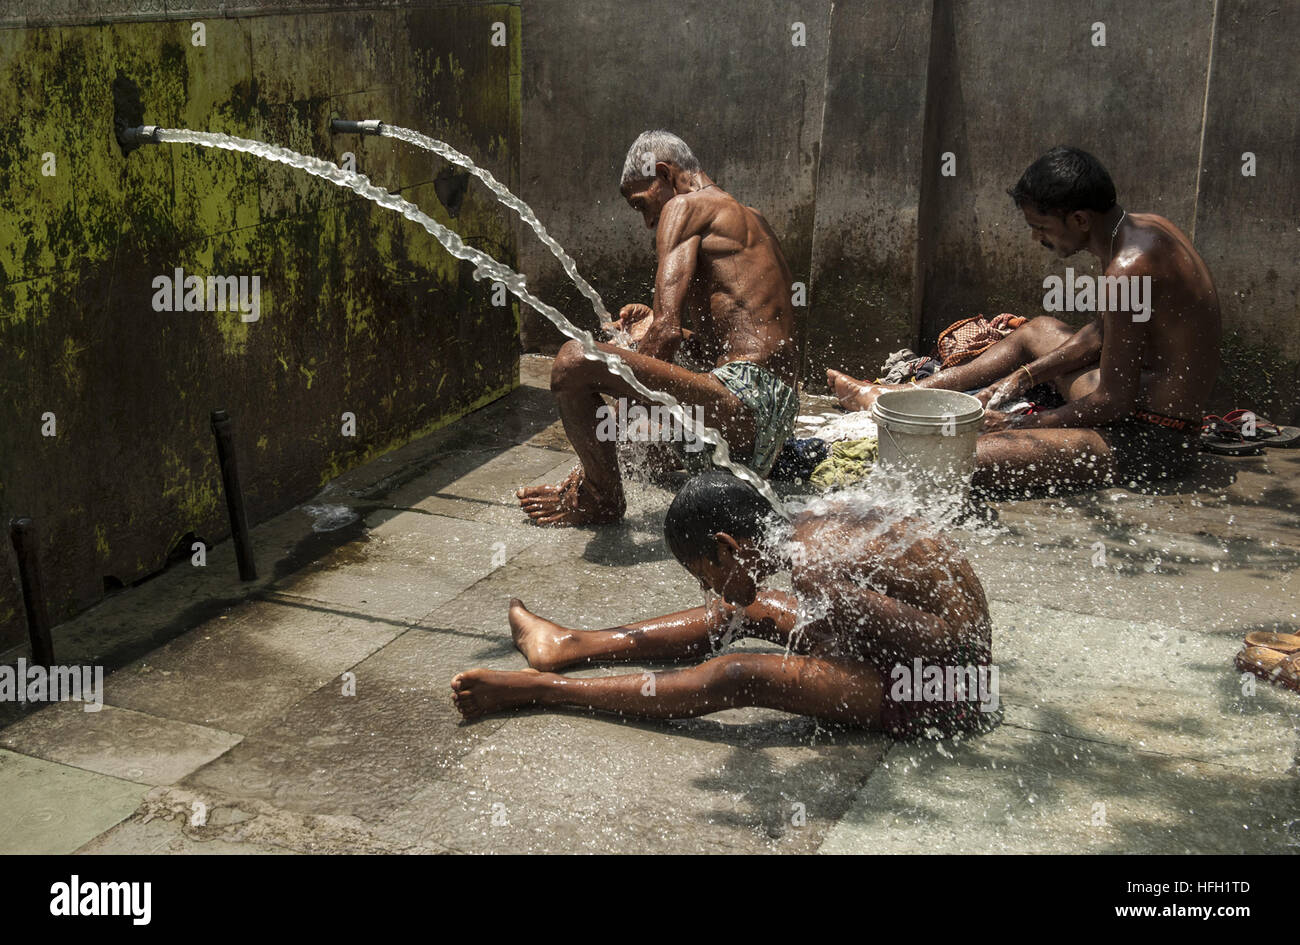 Beijing, Indian state West Bengal. 21st Apr, 2016. Indian people take bath at roadside water faucets in Kolkata, capital of eastern Indian state West Bengal, on April 21, 2016. © Tumpa Mondal/Xinhua/Alamy Live News Stock Photo